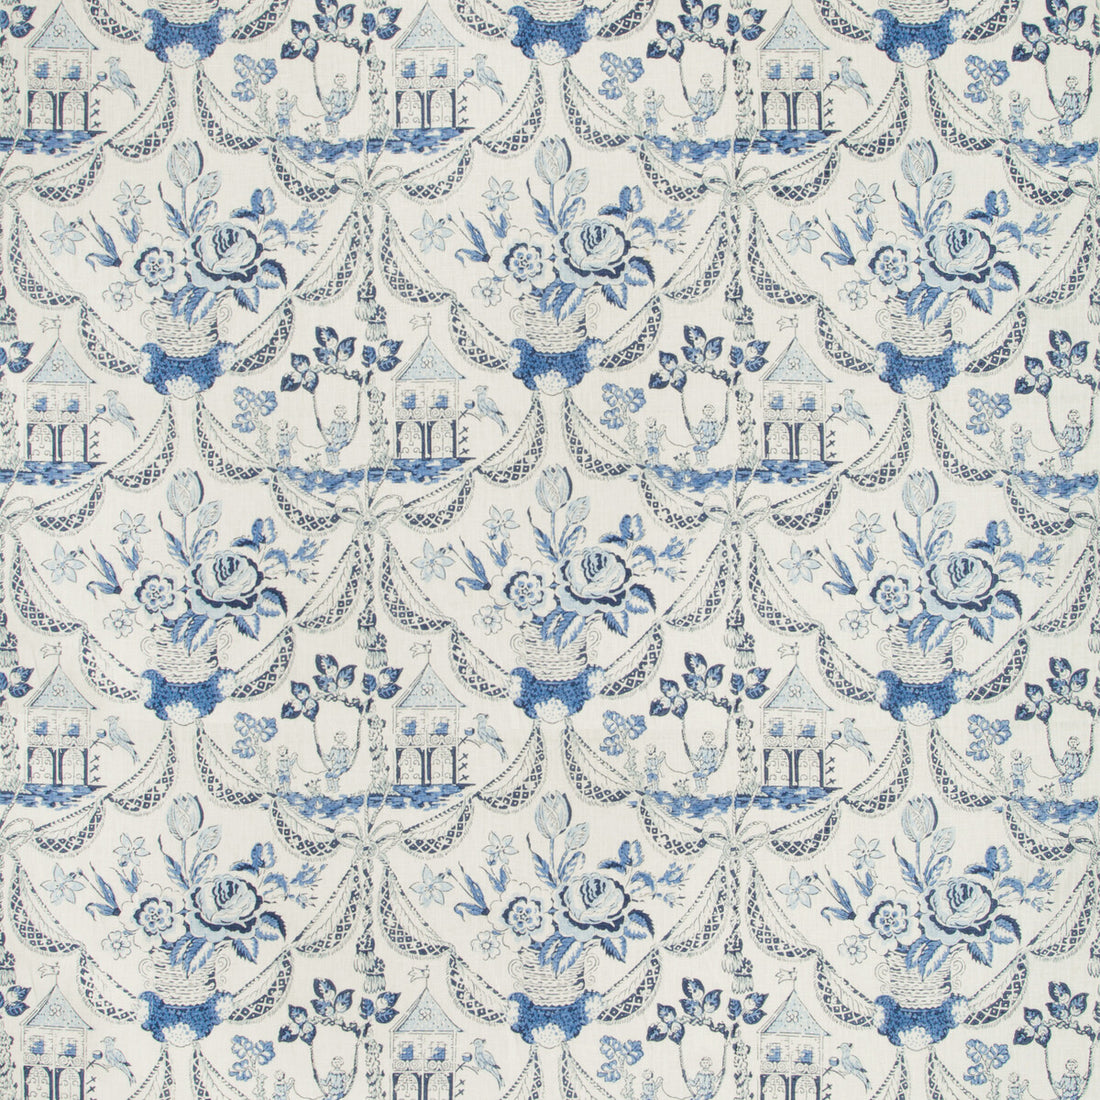 Bird &amp; Swing Hb fabric in blue color - pattern 8019100.5.0 - by Brunschwig &amp; Fils